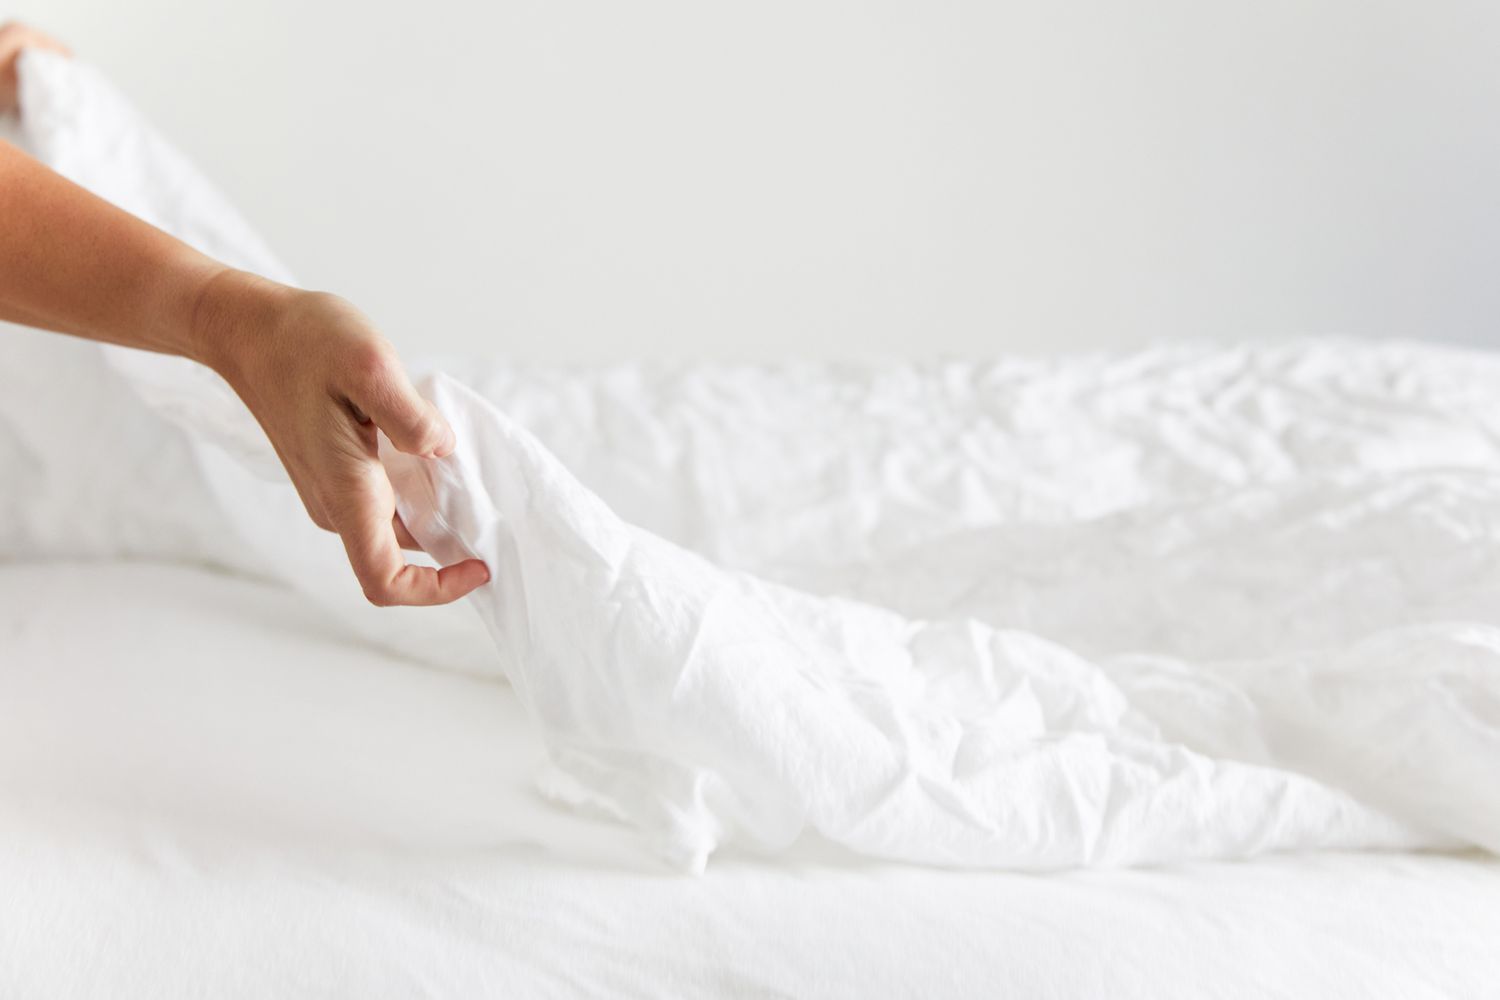 Remove Bed Covers And Sheets